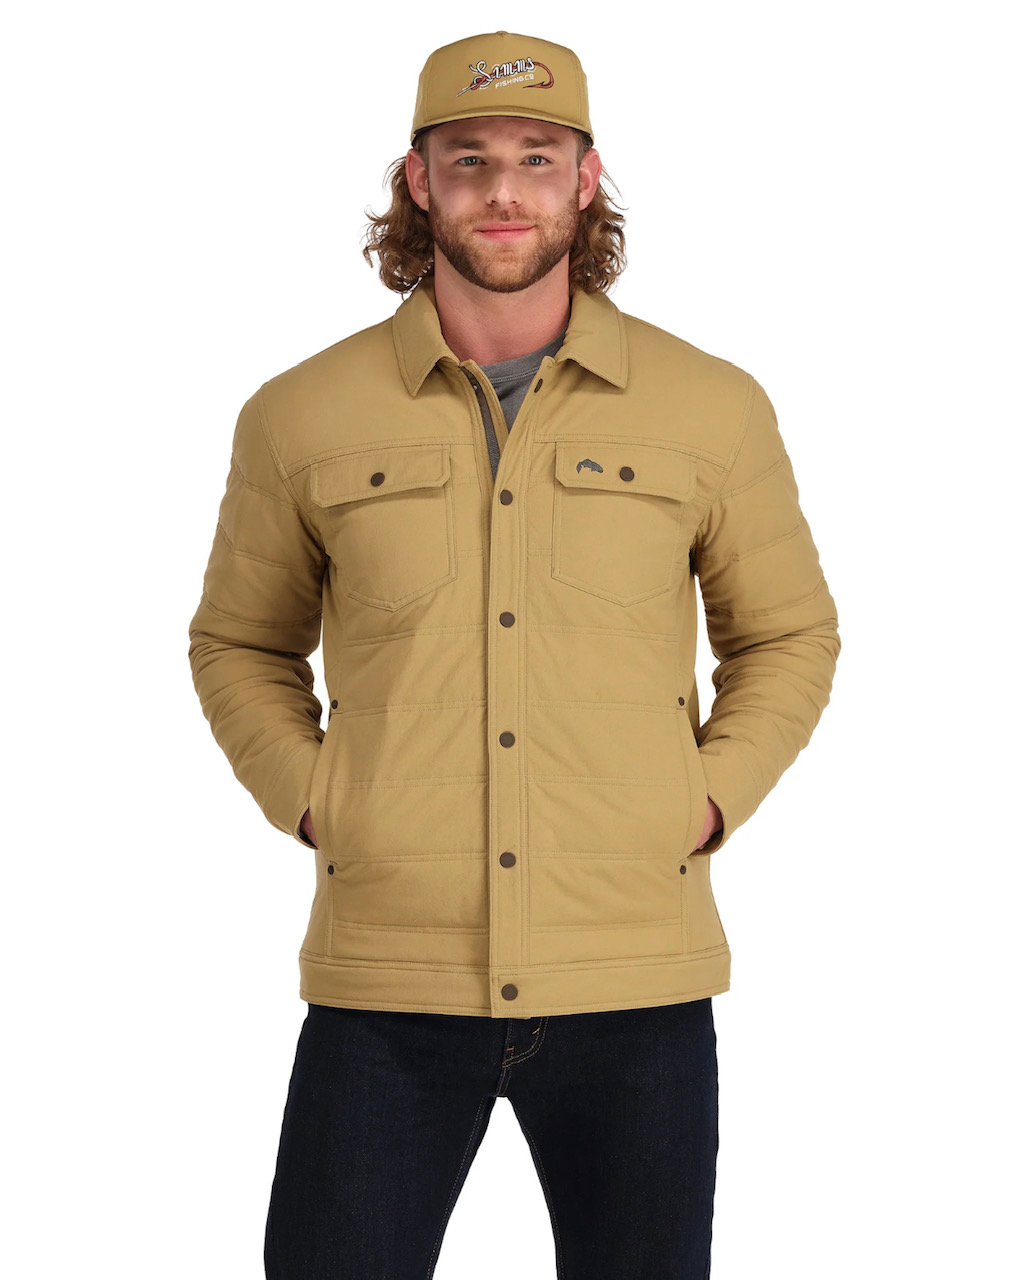 Simms M's Cardwell Jacket - Camel - Large